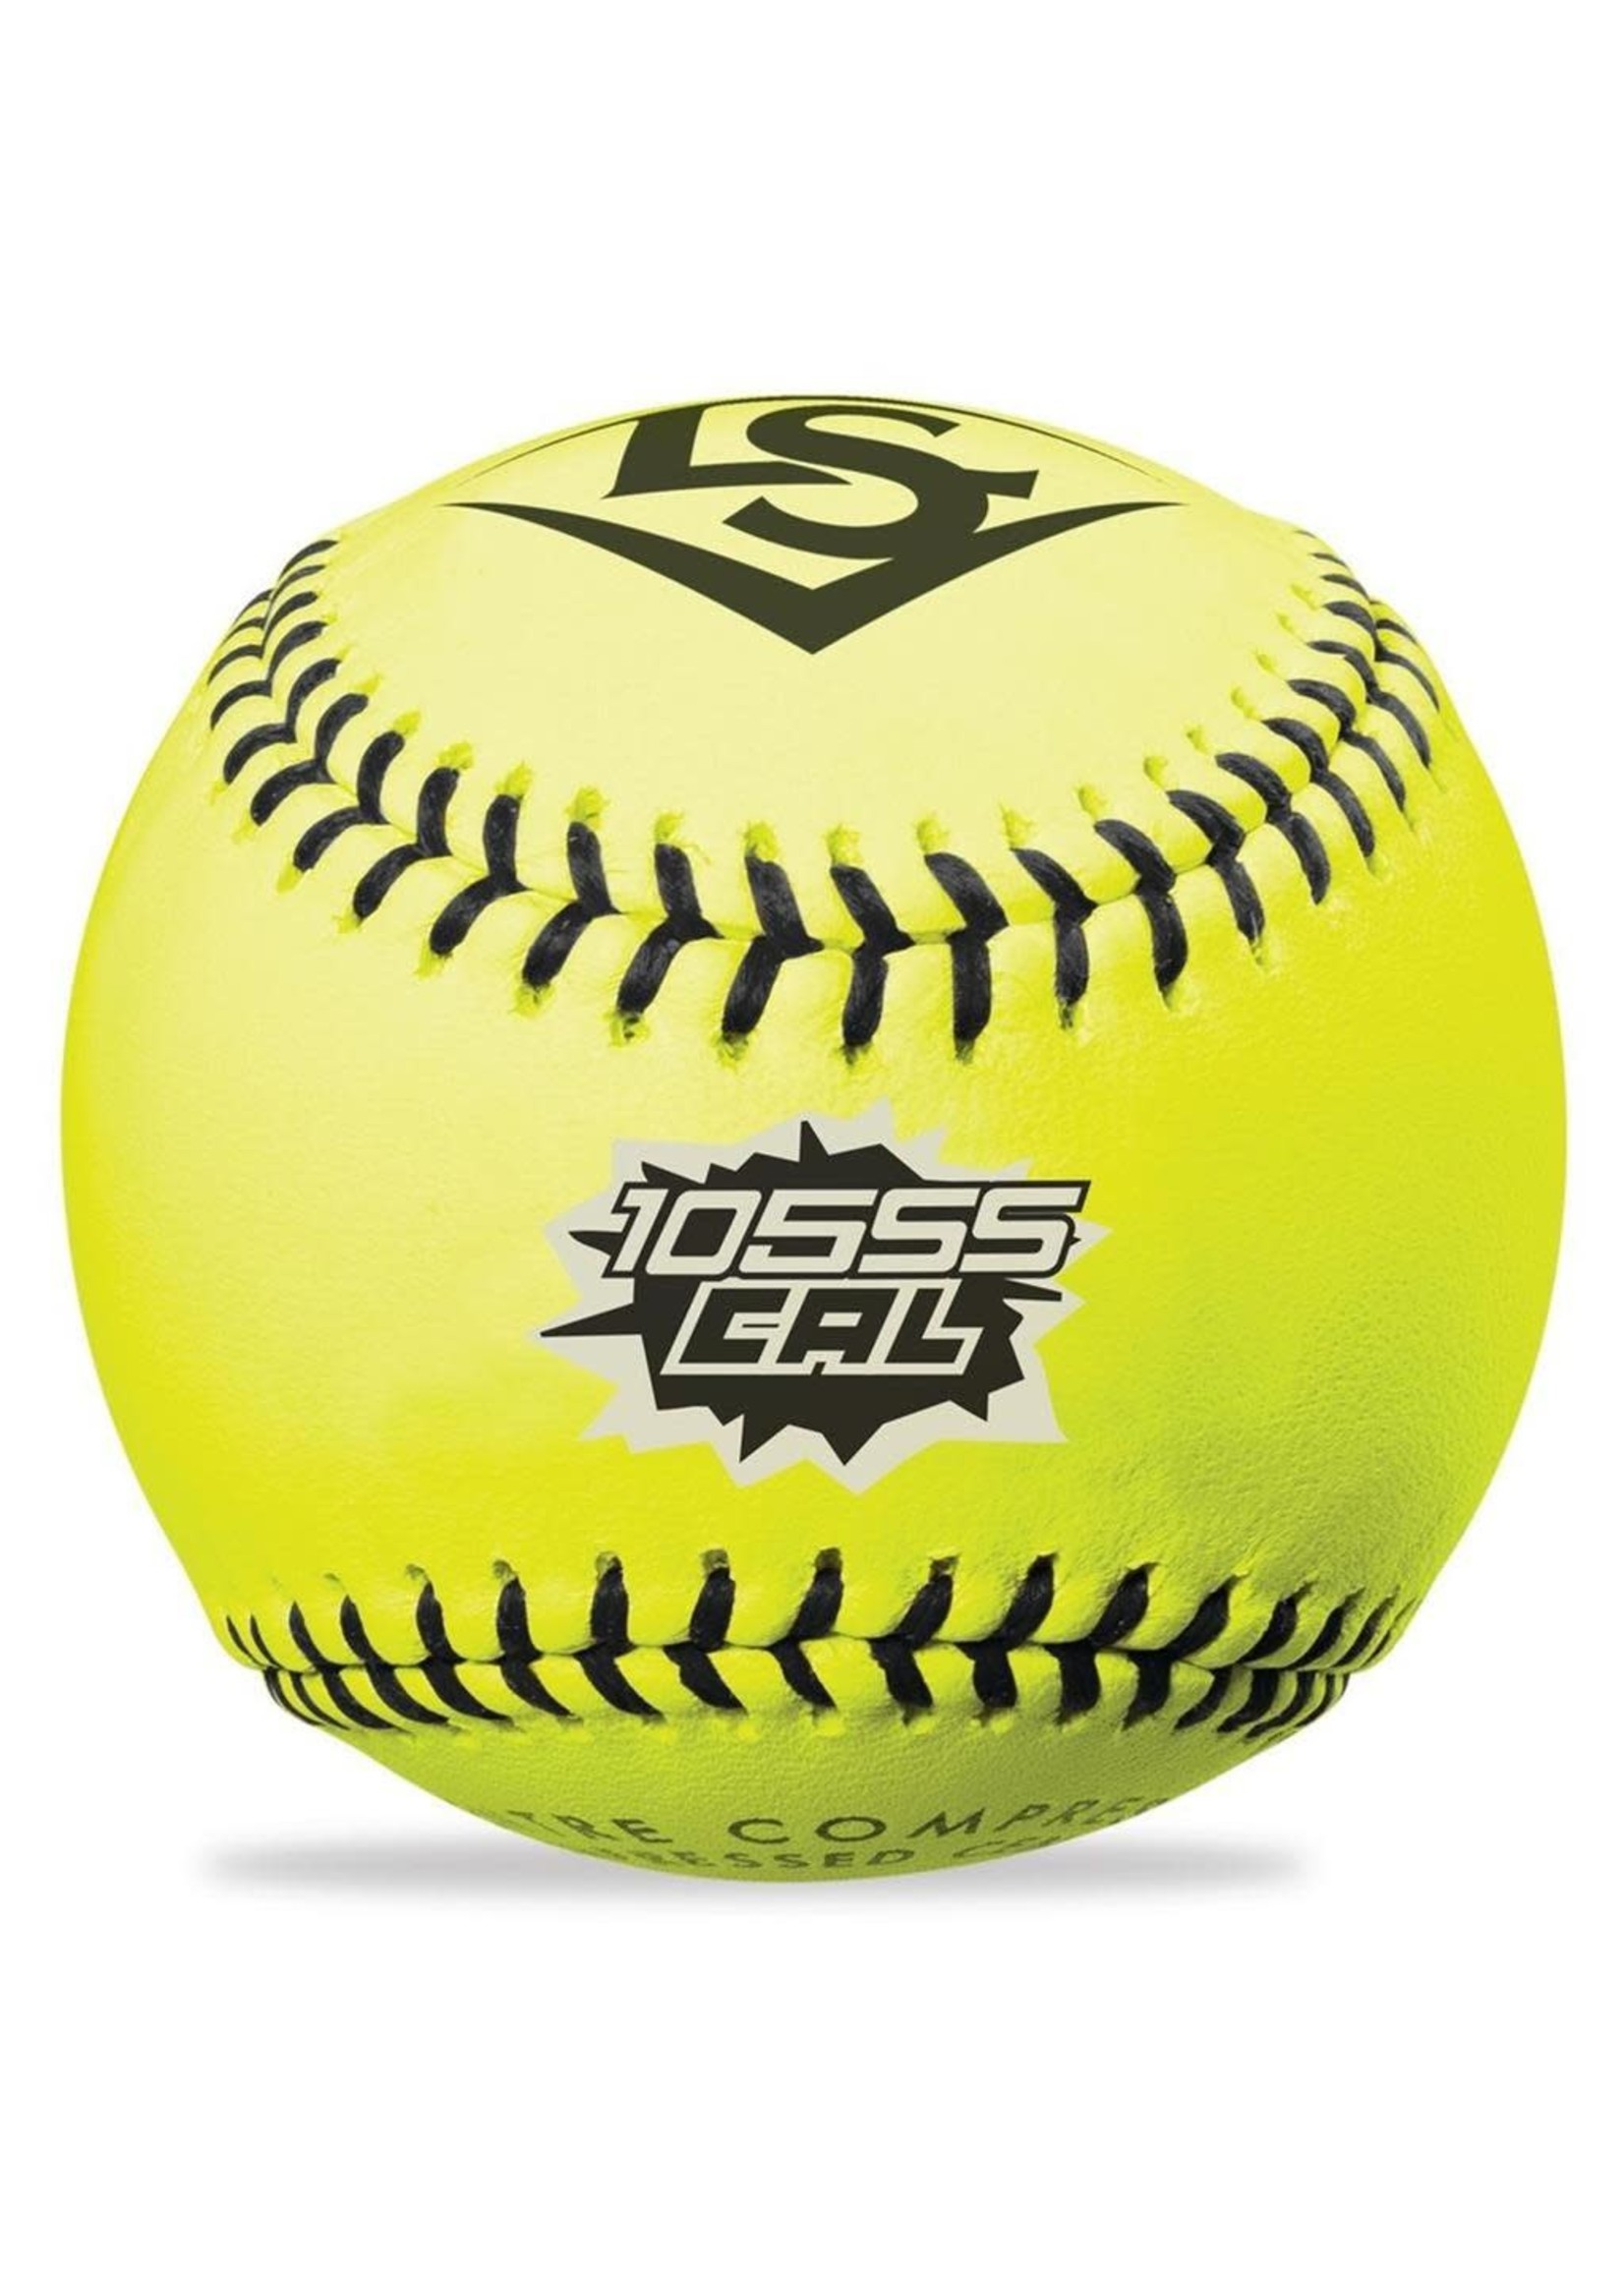 Louisville (Canada) LSSB105SS NSA Approved Softball 12'' COR. 47 UNITÉ Compression: 230 LBS